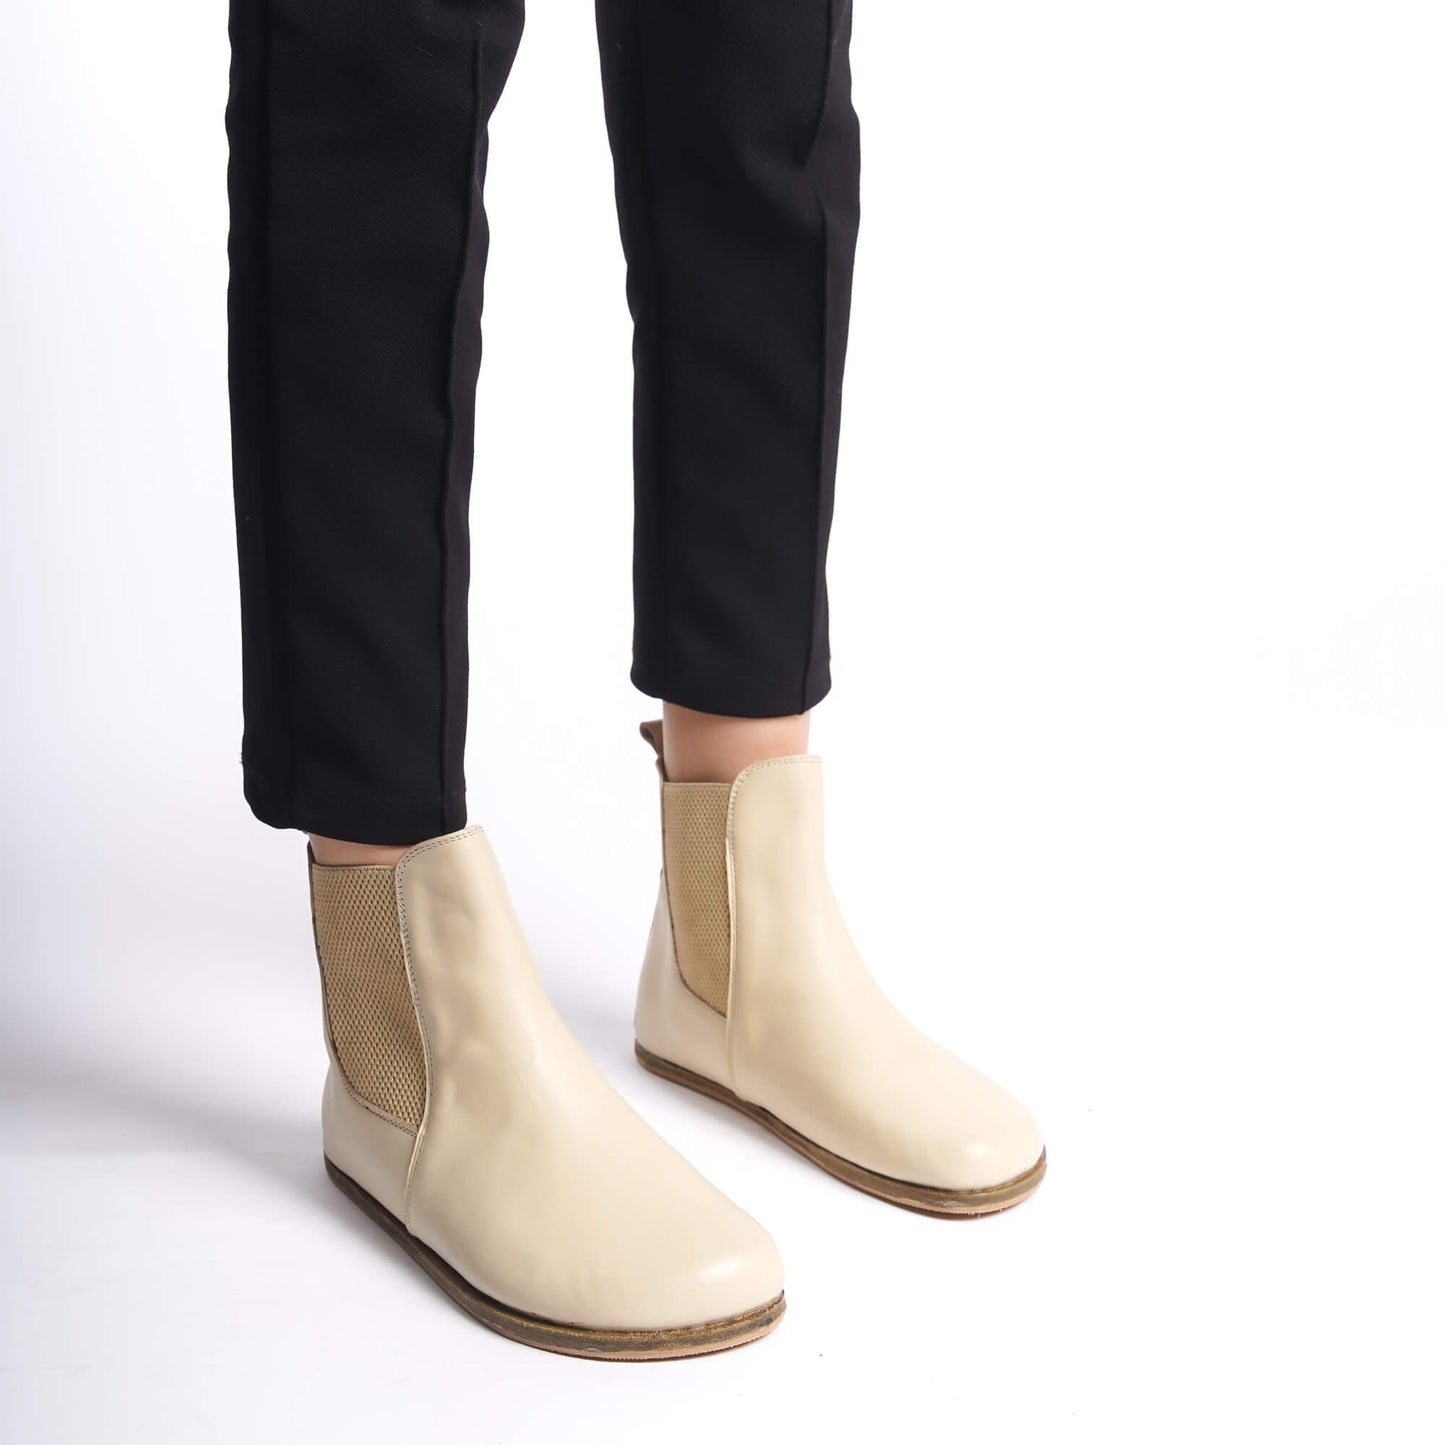 Cream-colored natural leather Chelsea boots with a wide toe box for women. Combining minimalist design with maximum comfort.